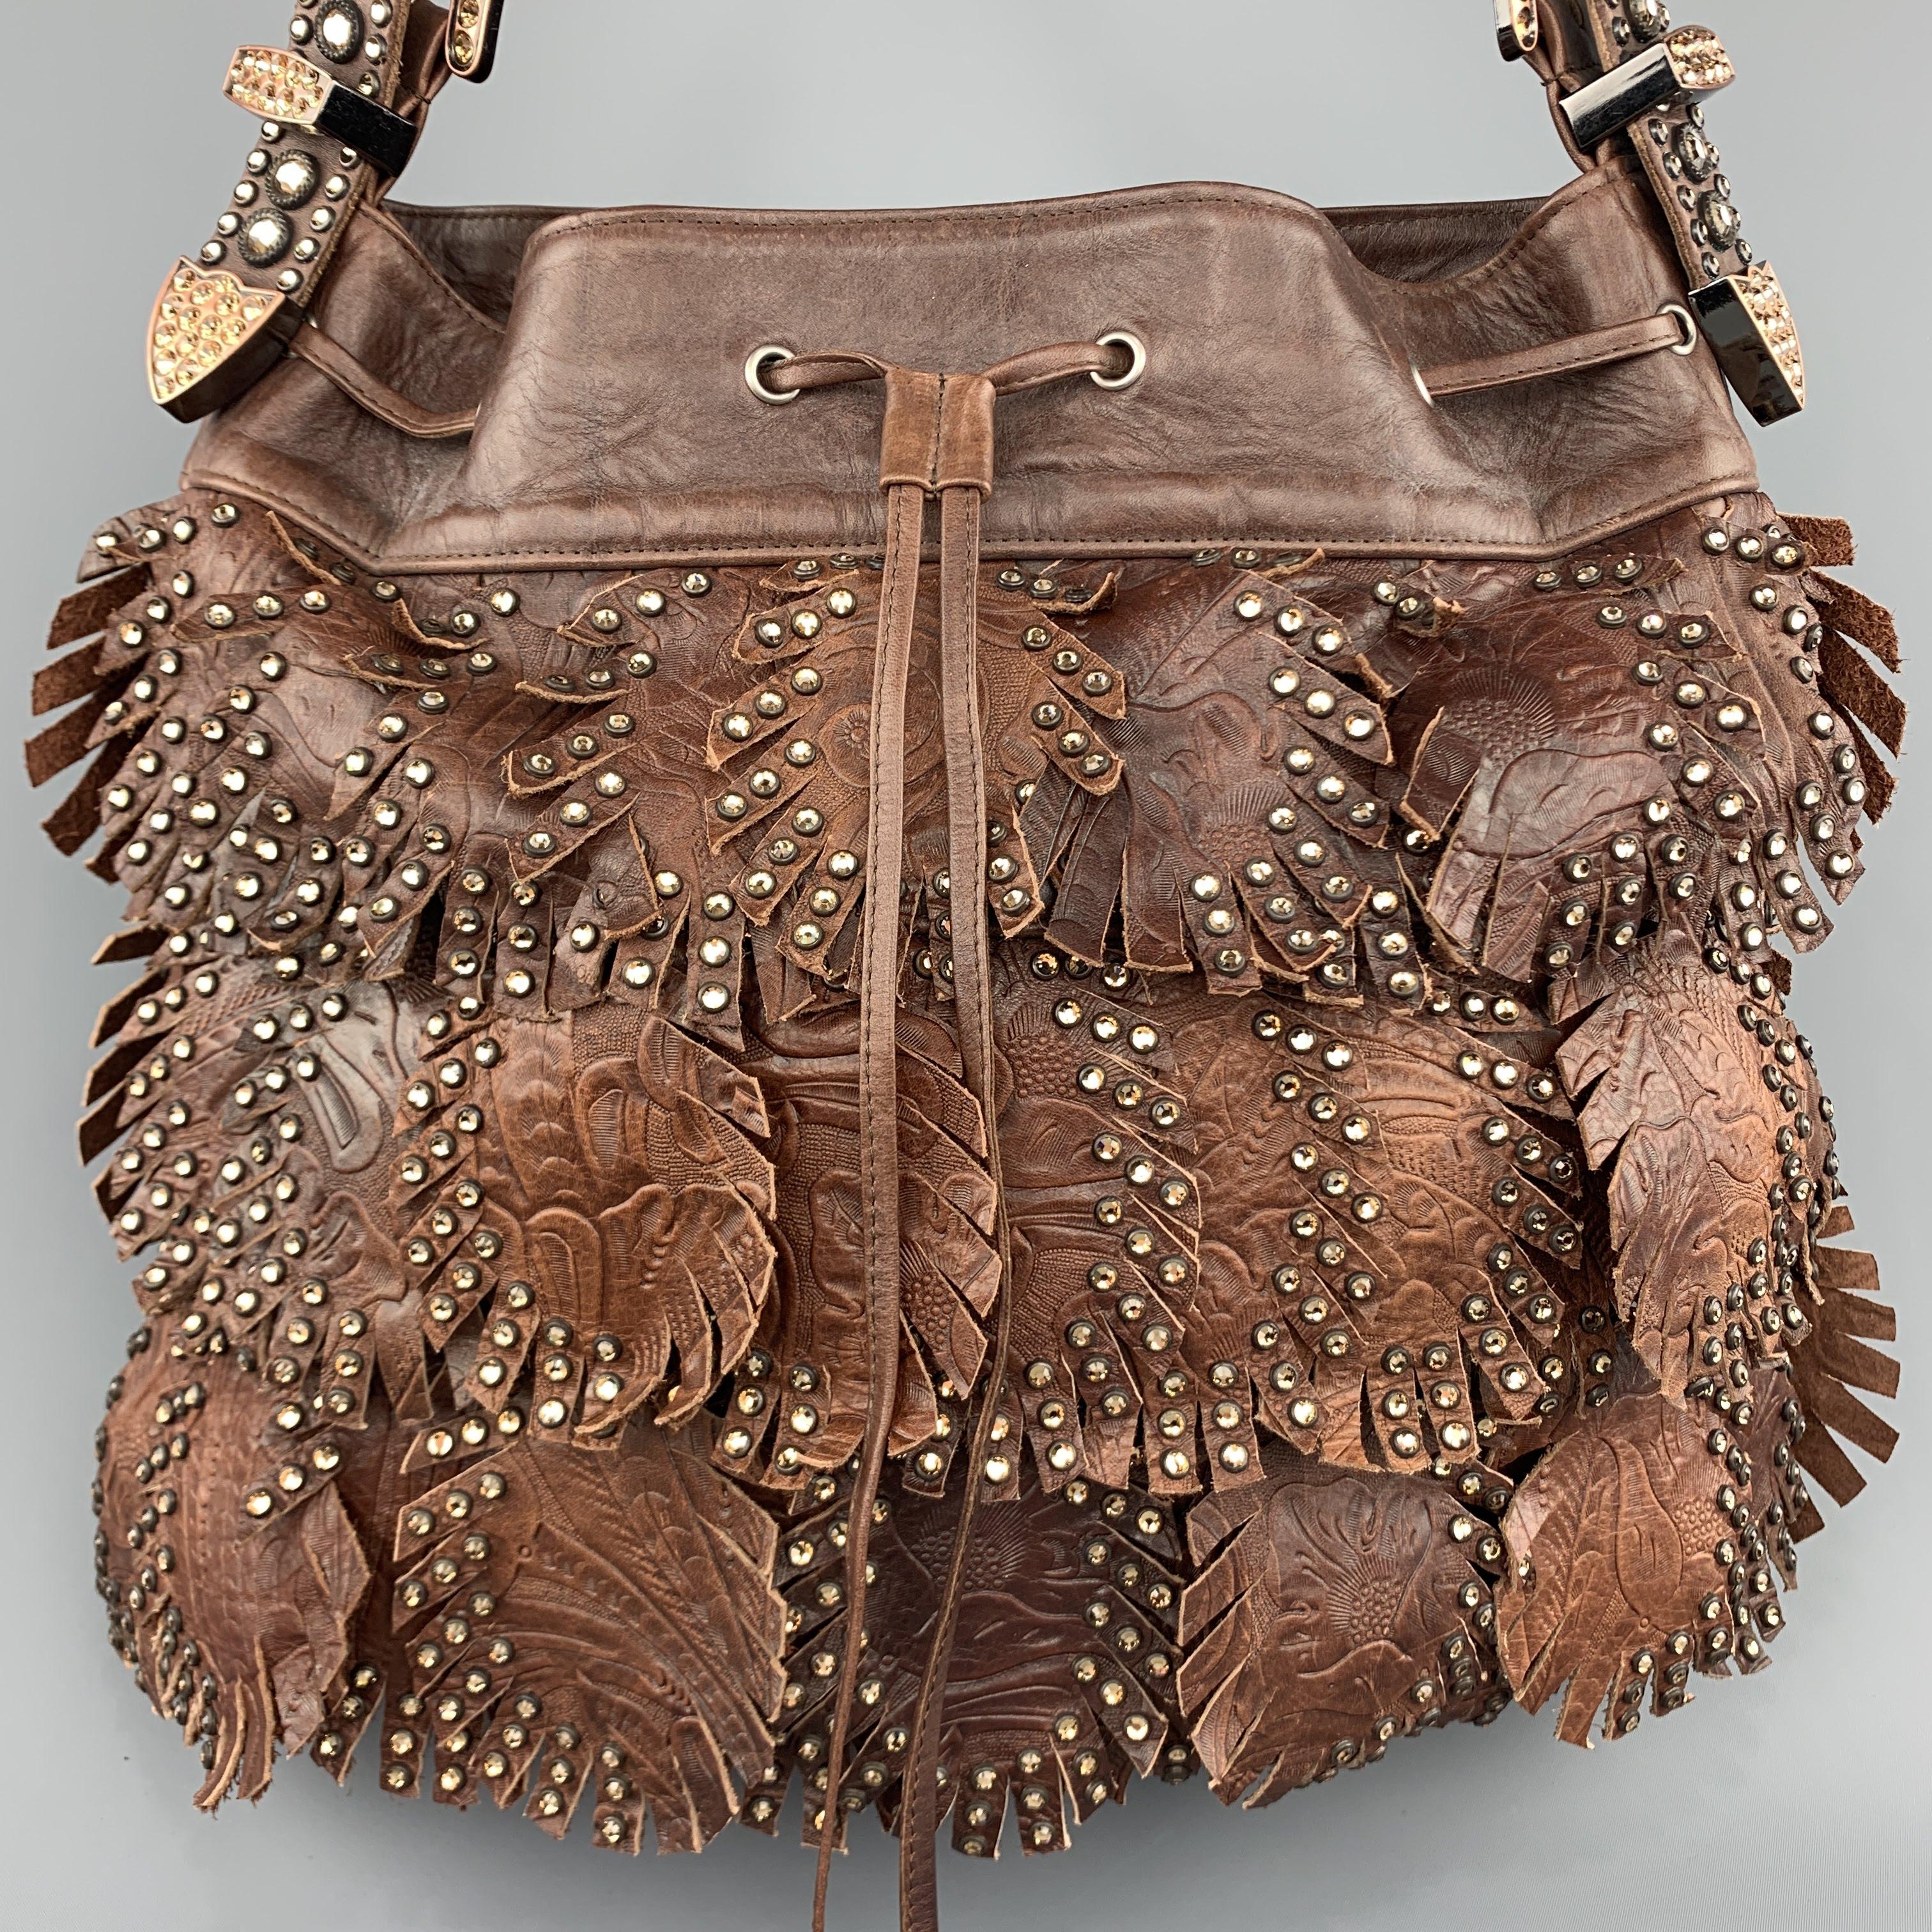 KIPPYS handbag comes in brown leather covered in embossed fringed leaf fringe with rhinestone appliques, top zip closure, and western cowgirl buckle shoulder strap.
 
Excellent Pre-Owned Condition.
 
Measurements:
 
Length: 13 in.
Width: 2